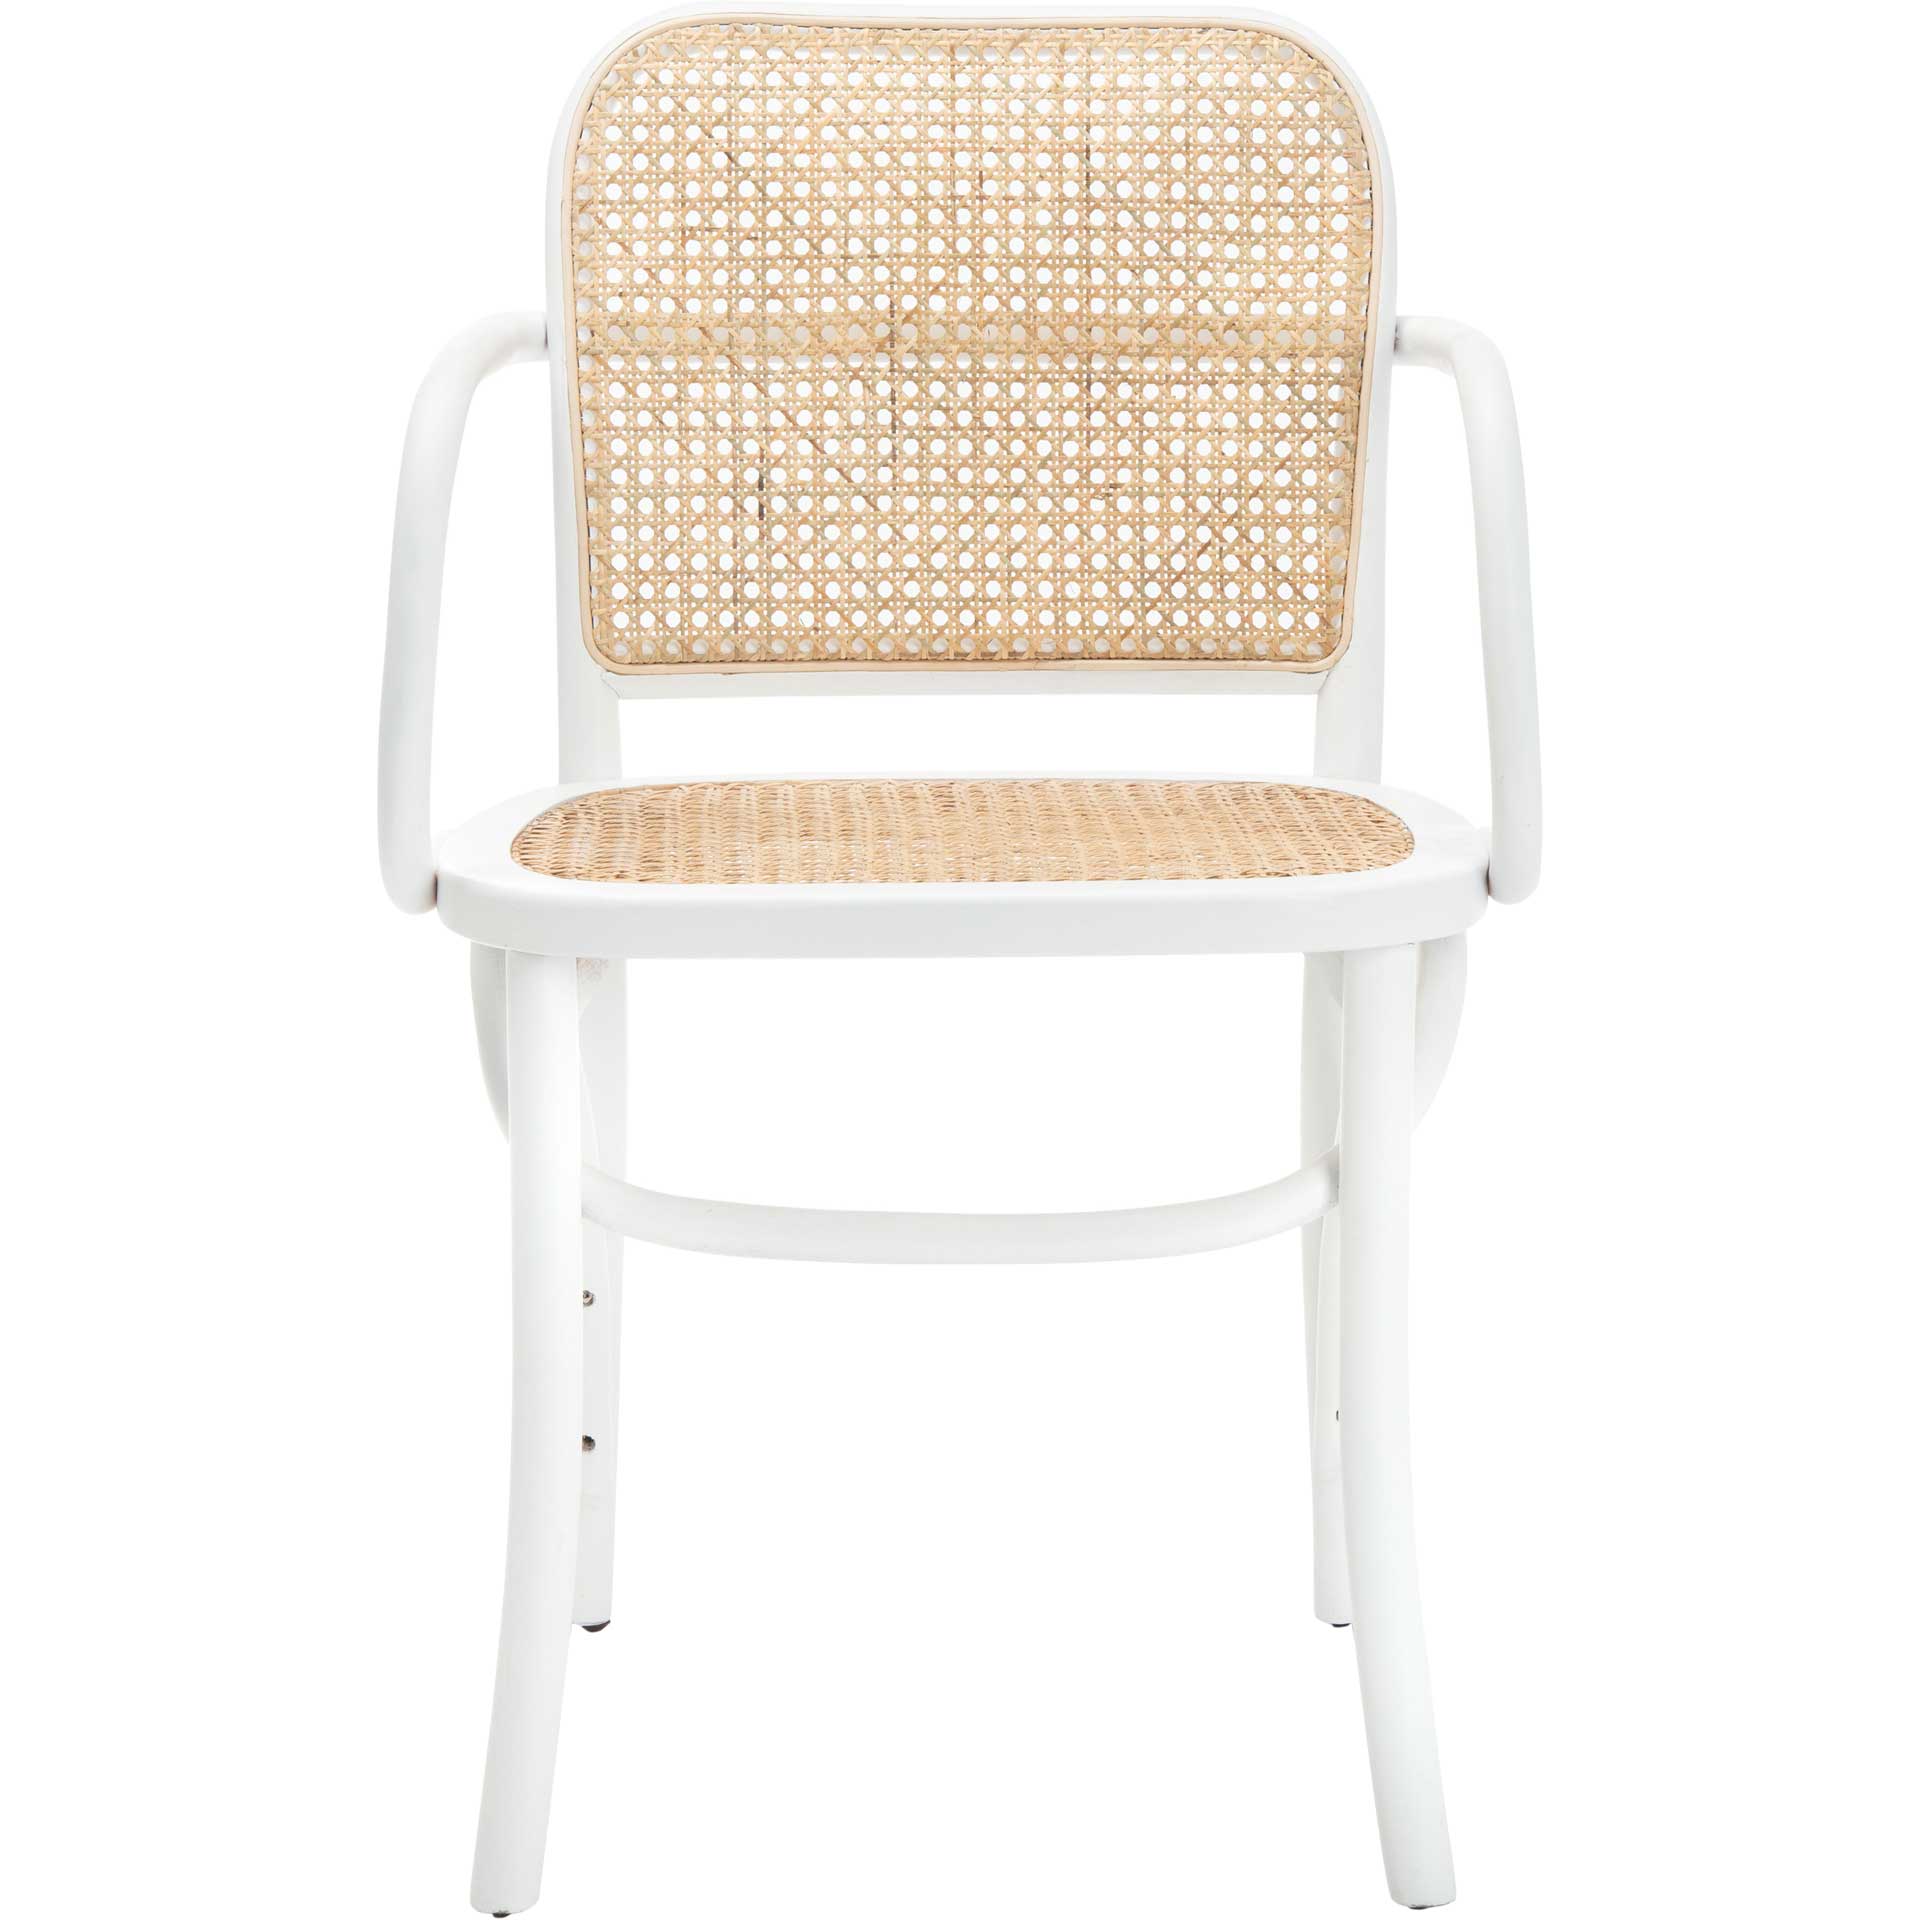 Keanu Cane Dining Chair White/Natural